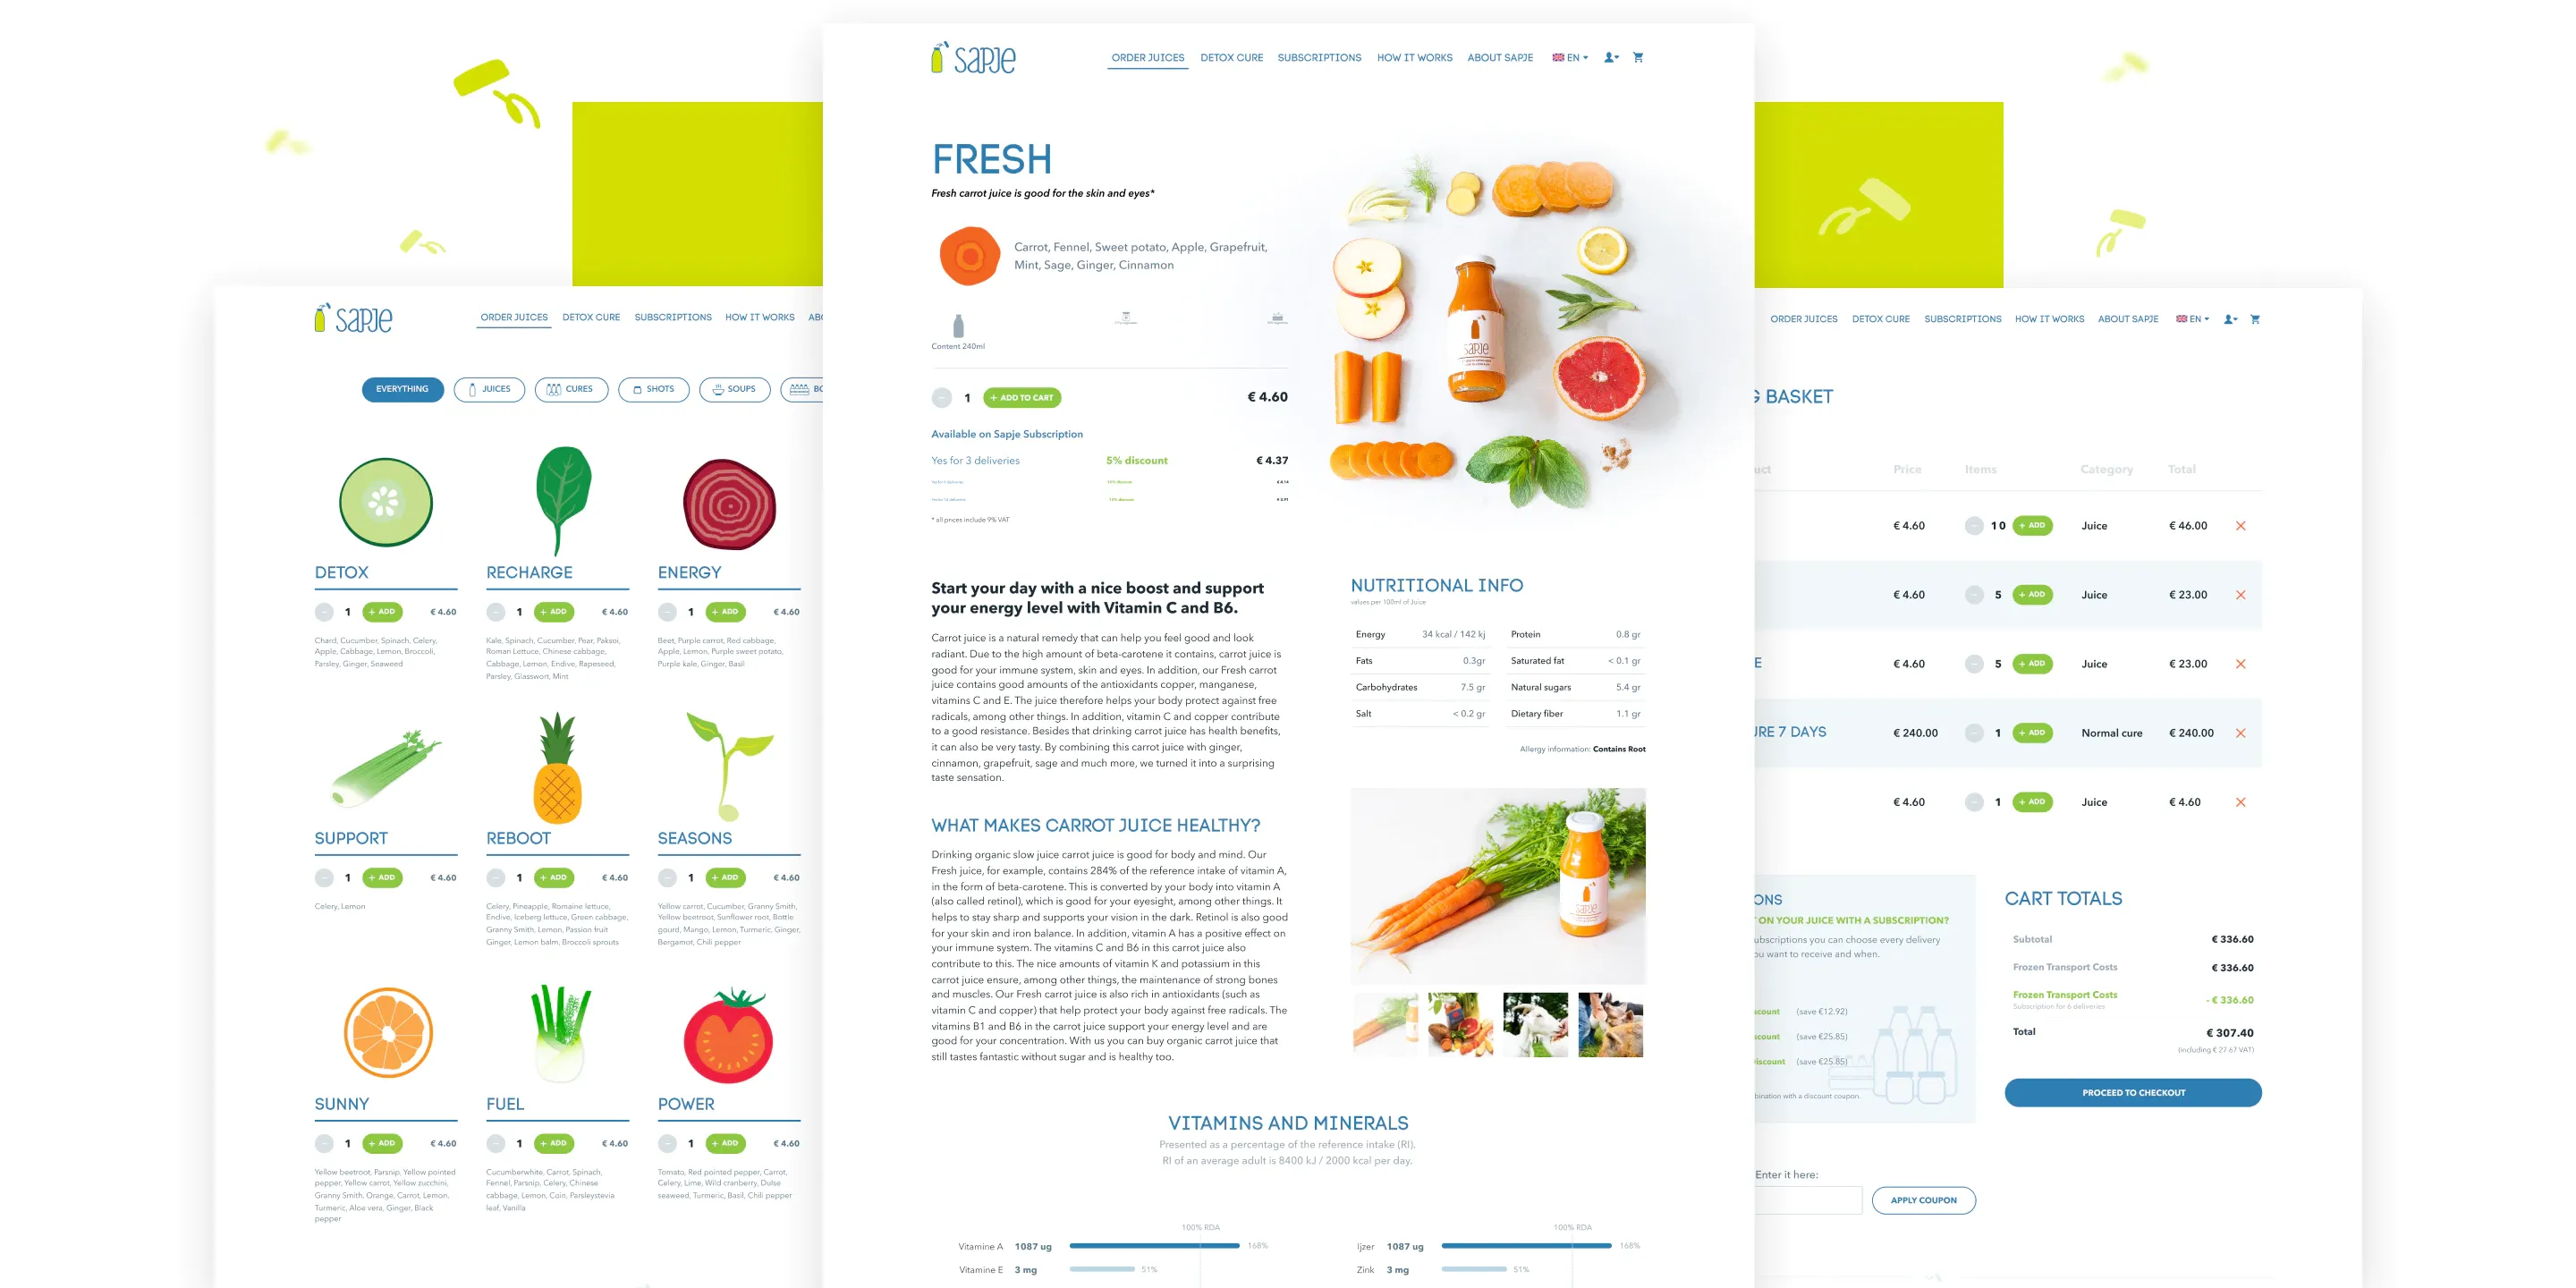 Screenshots of the various SAPJE pages: one with the list of available products, another with the details of one of the juices, and another with the shopping cart.